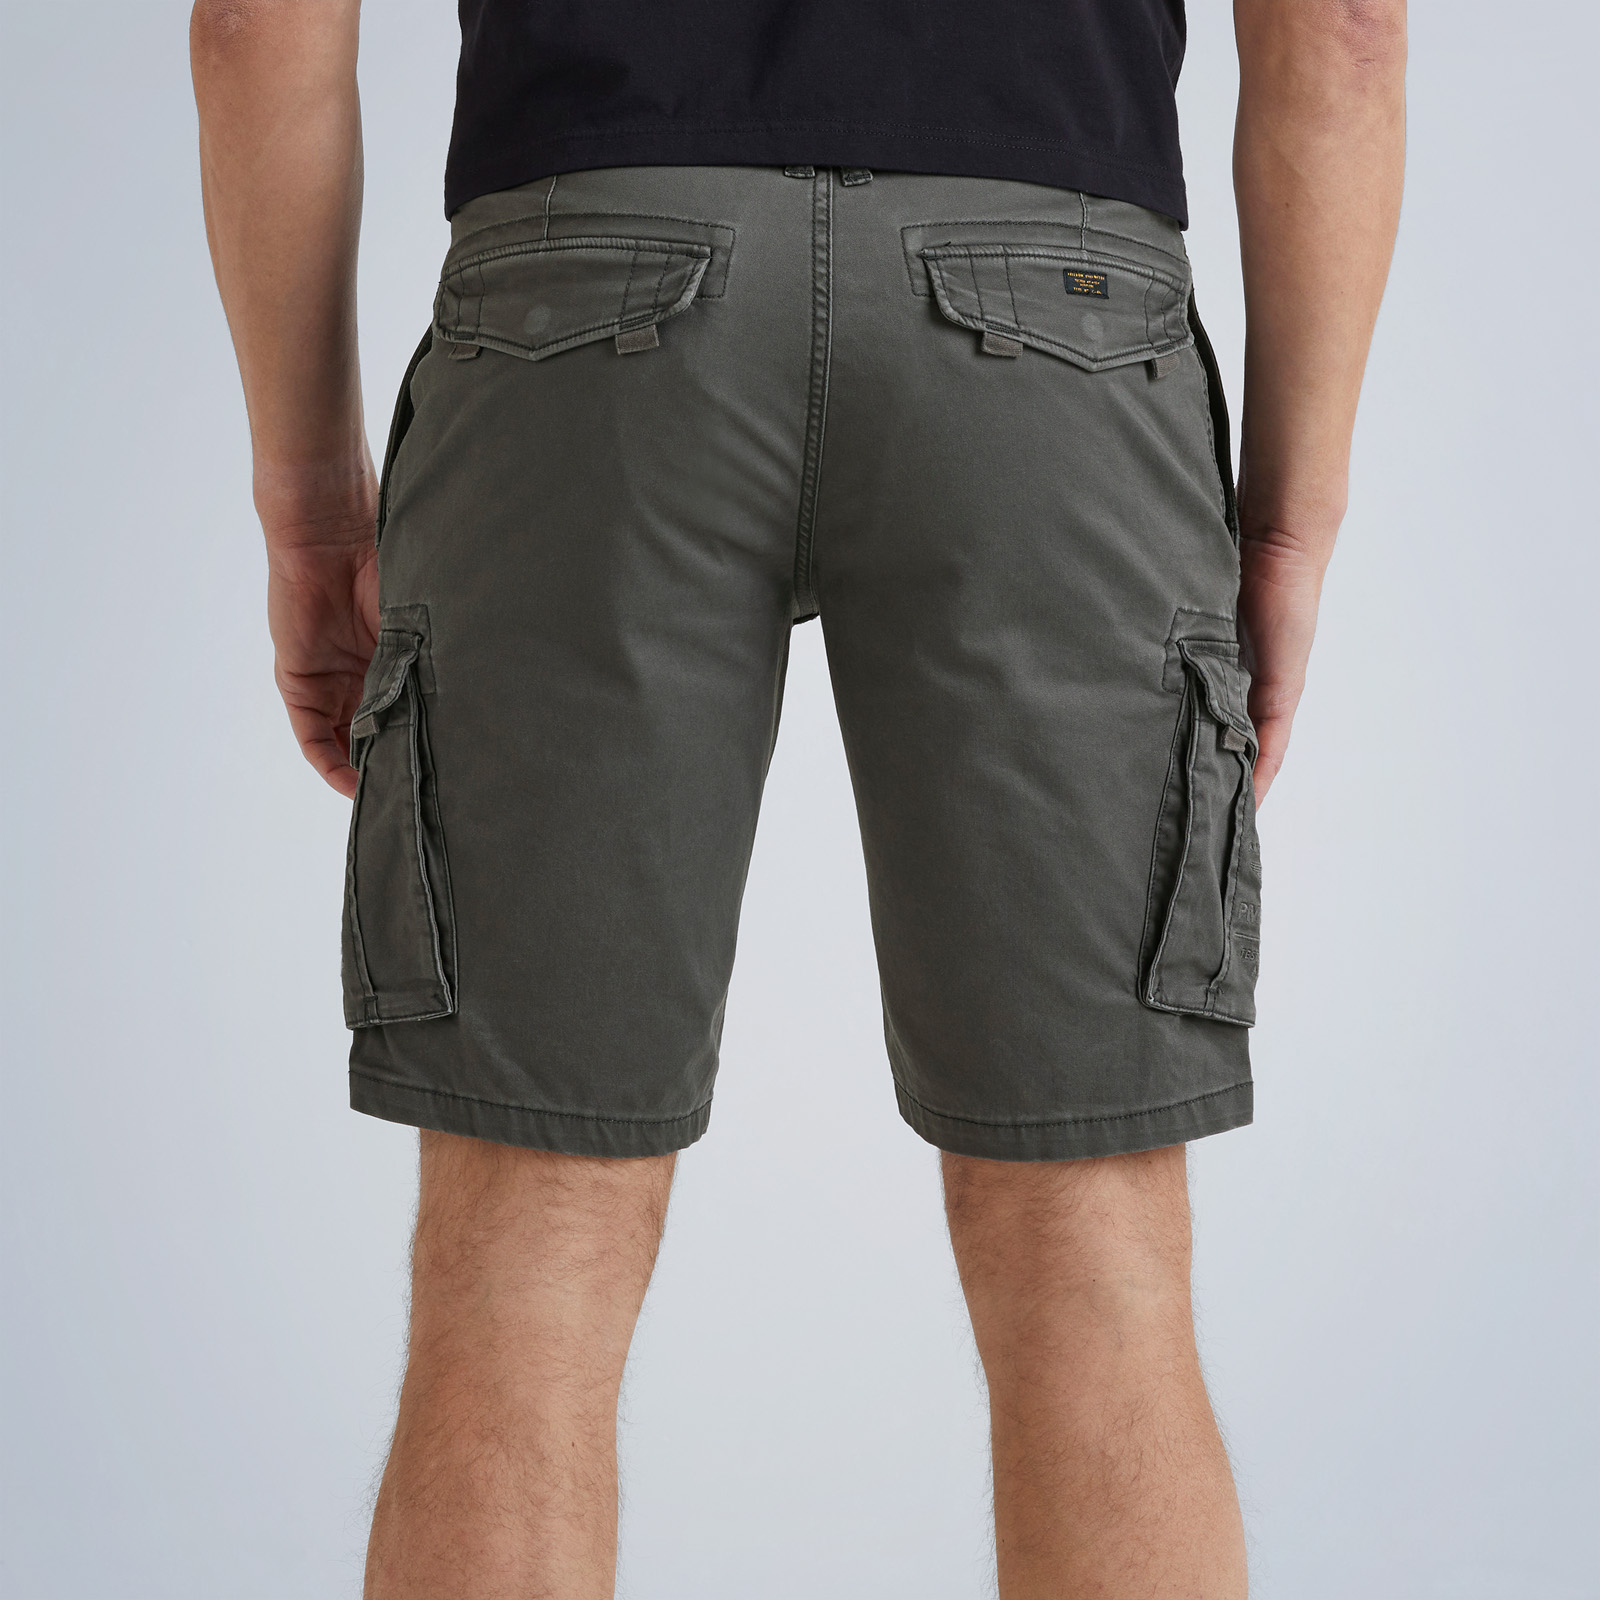 | LEGEND | shipping Short Cargo and Stretch PME Twill returns Free